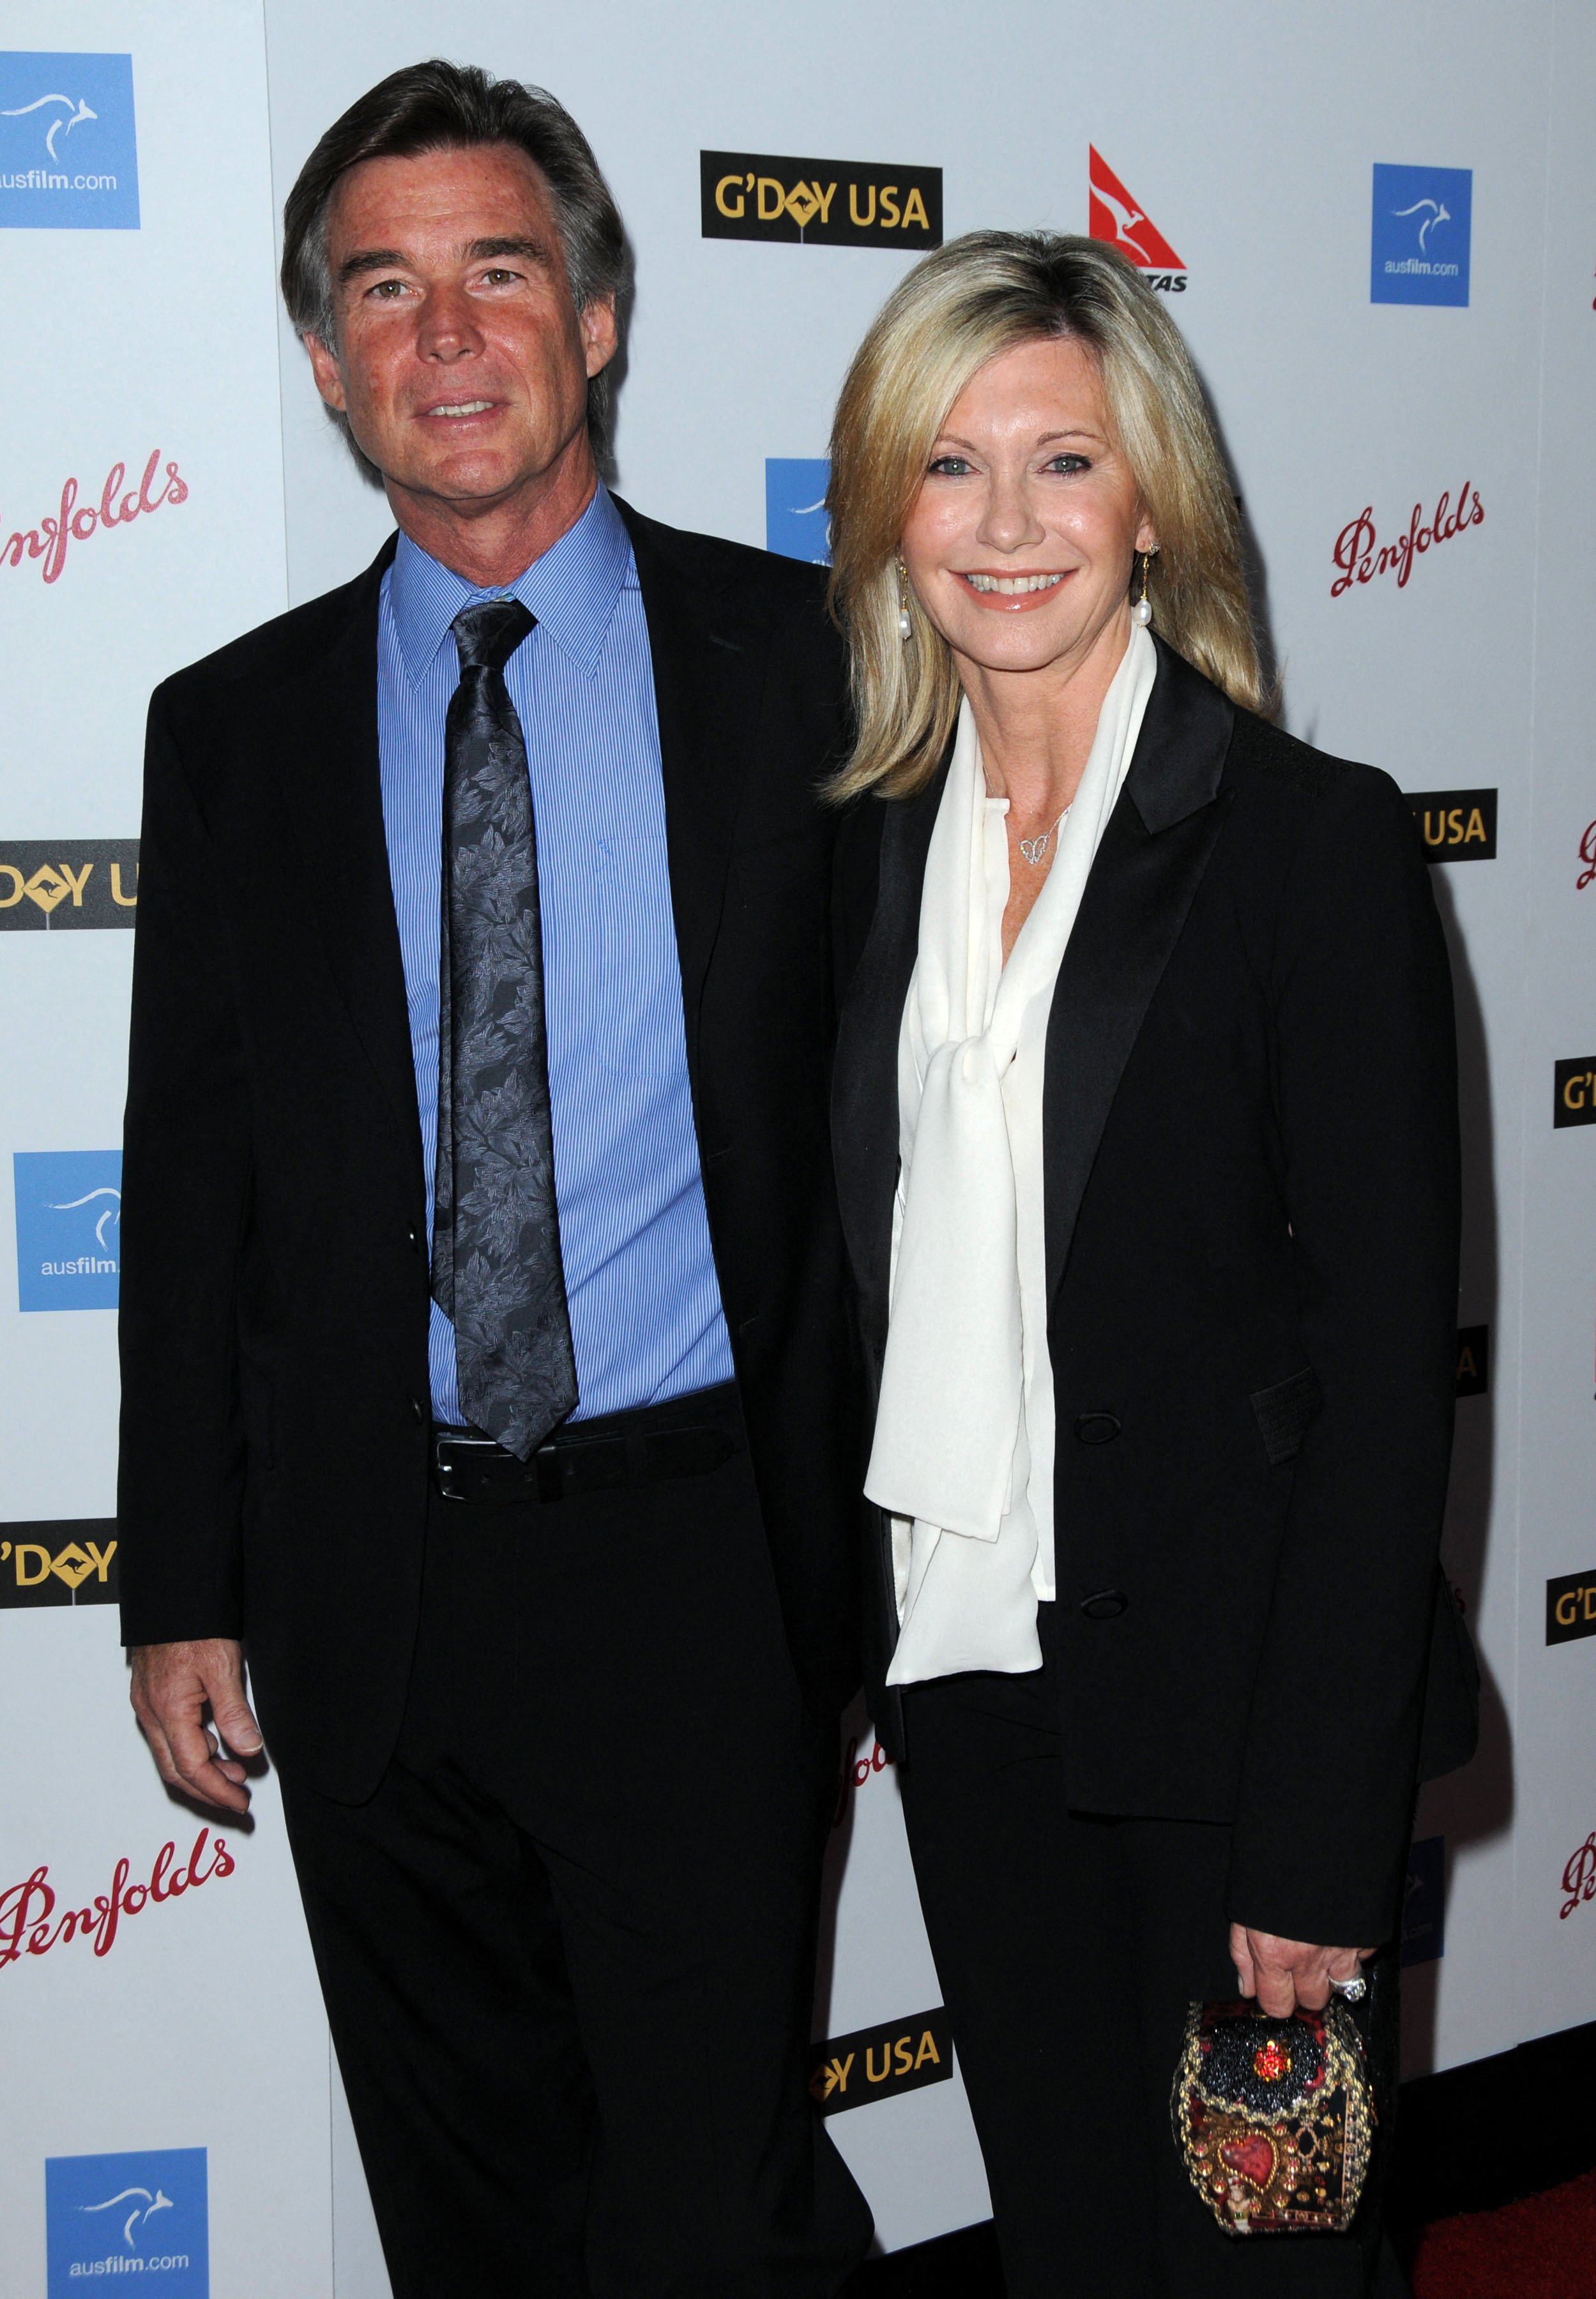 John Easterling and Olivia Newton-John at the G'Day USA Australia Week Gala in Los Angeles, January 18, 2009. | Source: Getty Images